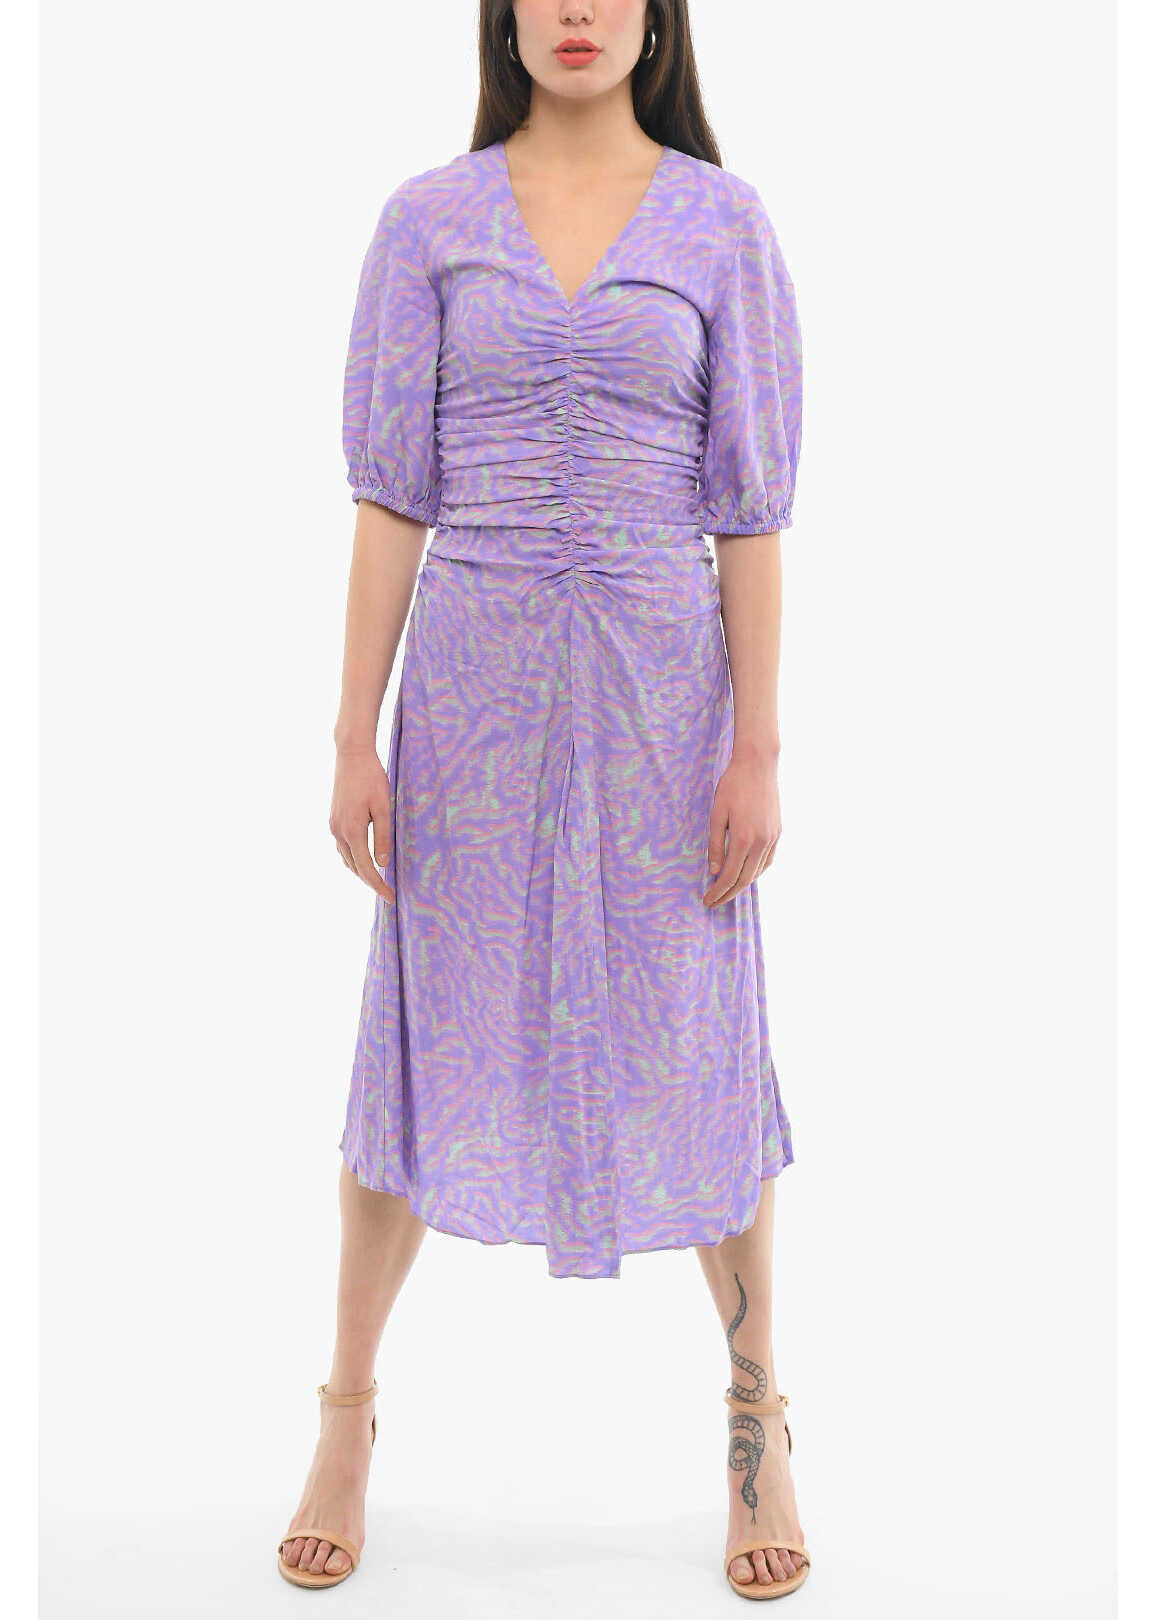 Paul Smith 3/4 Sleeved Rouched Printed Dress Violet image3